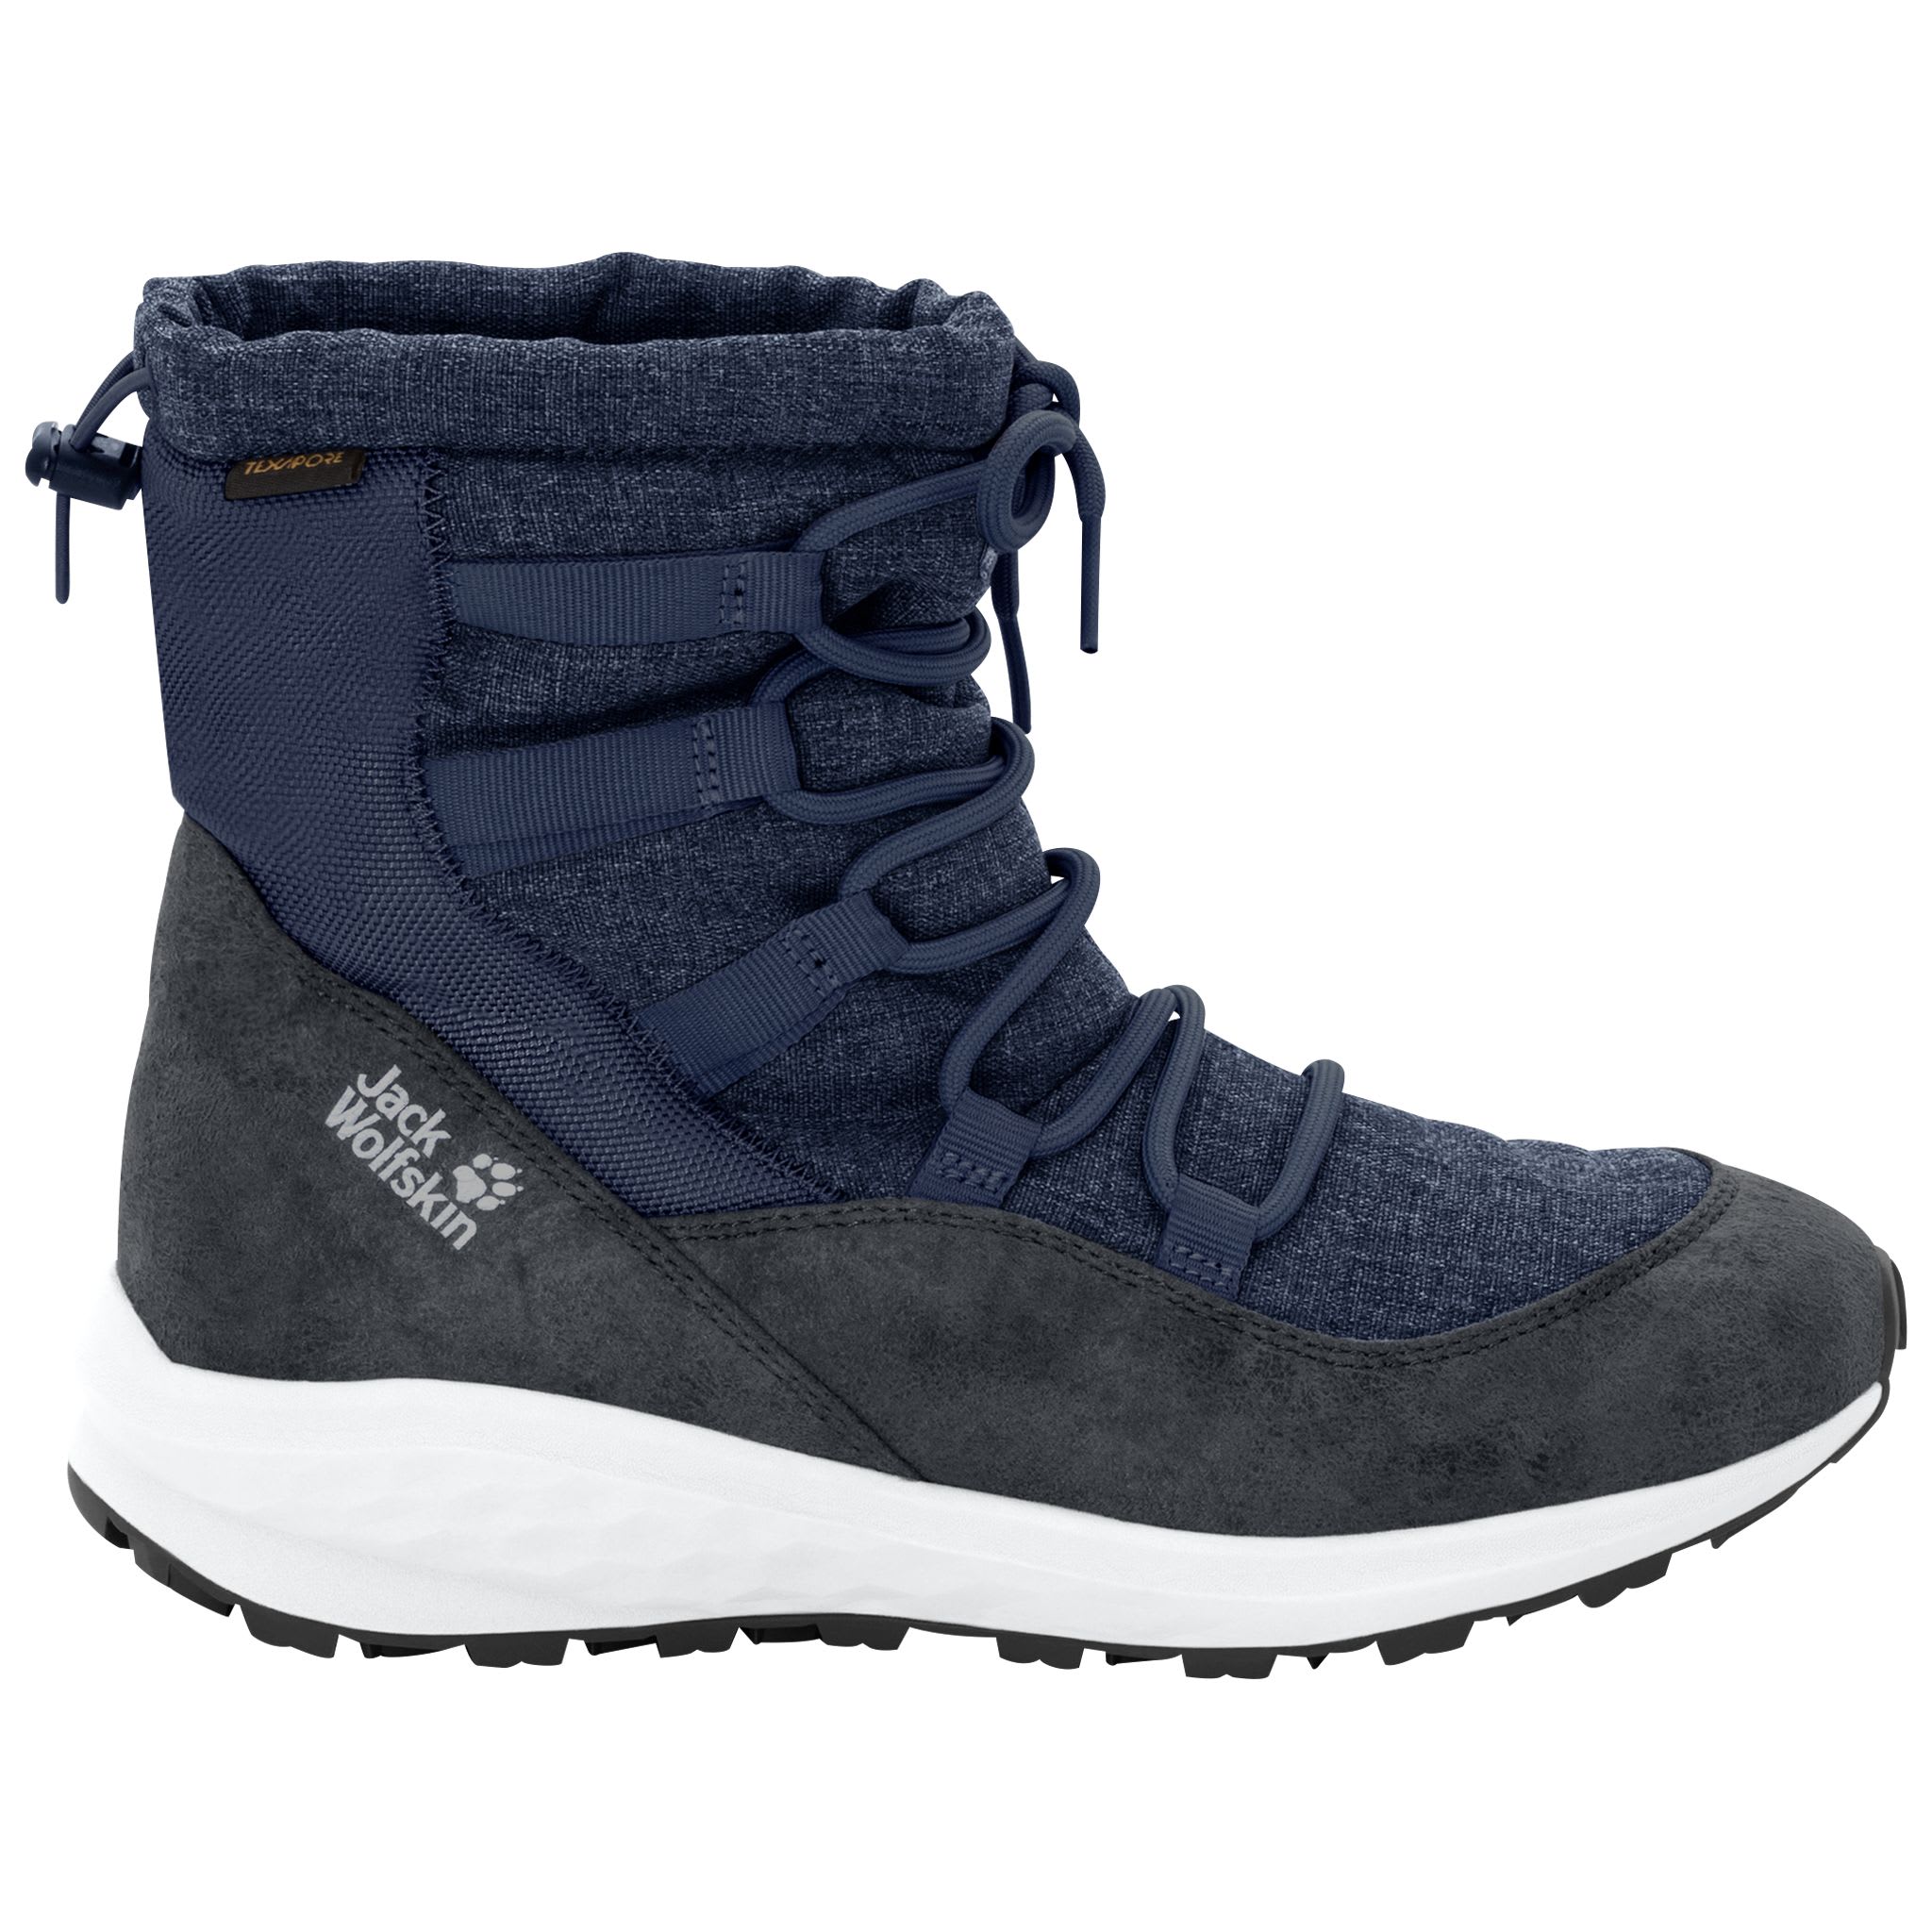 Køb Wolfskin Women's Nevada Texapore Mid fra Outnorth